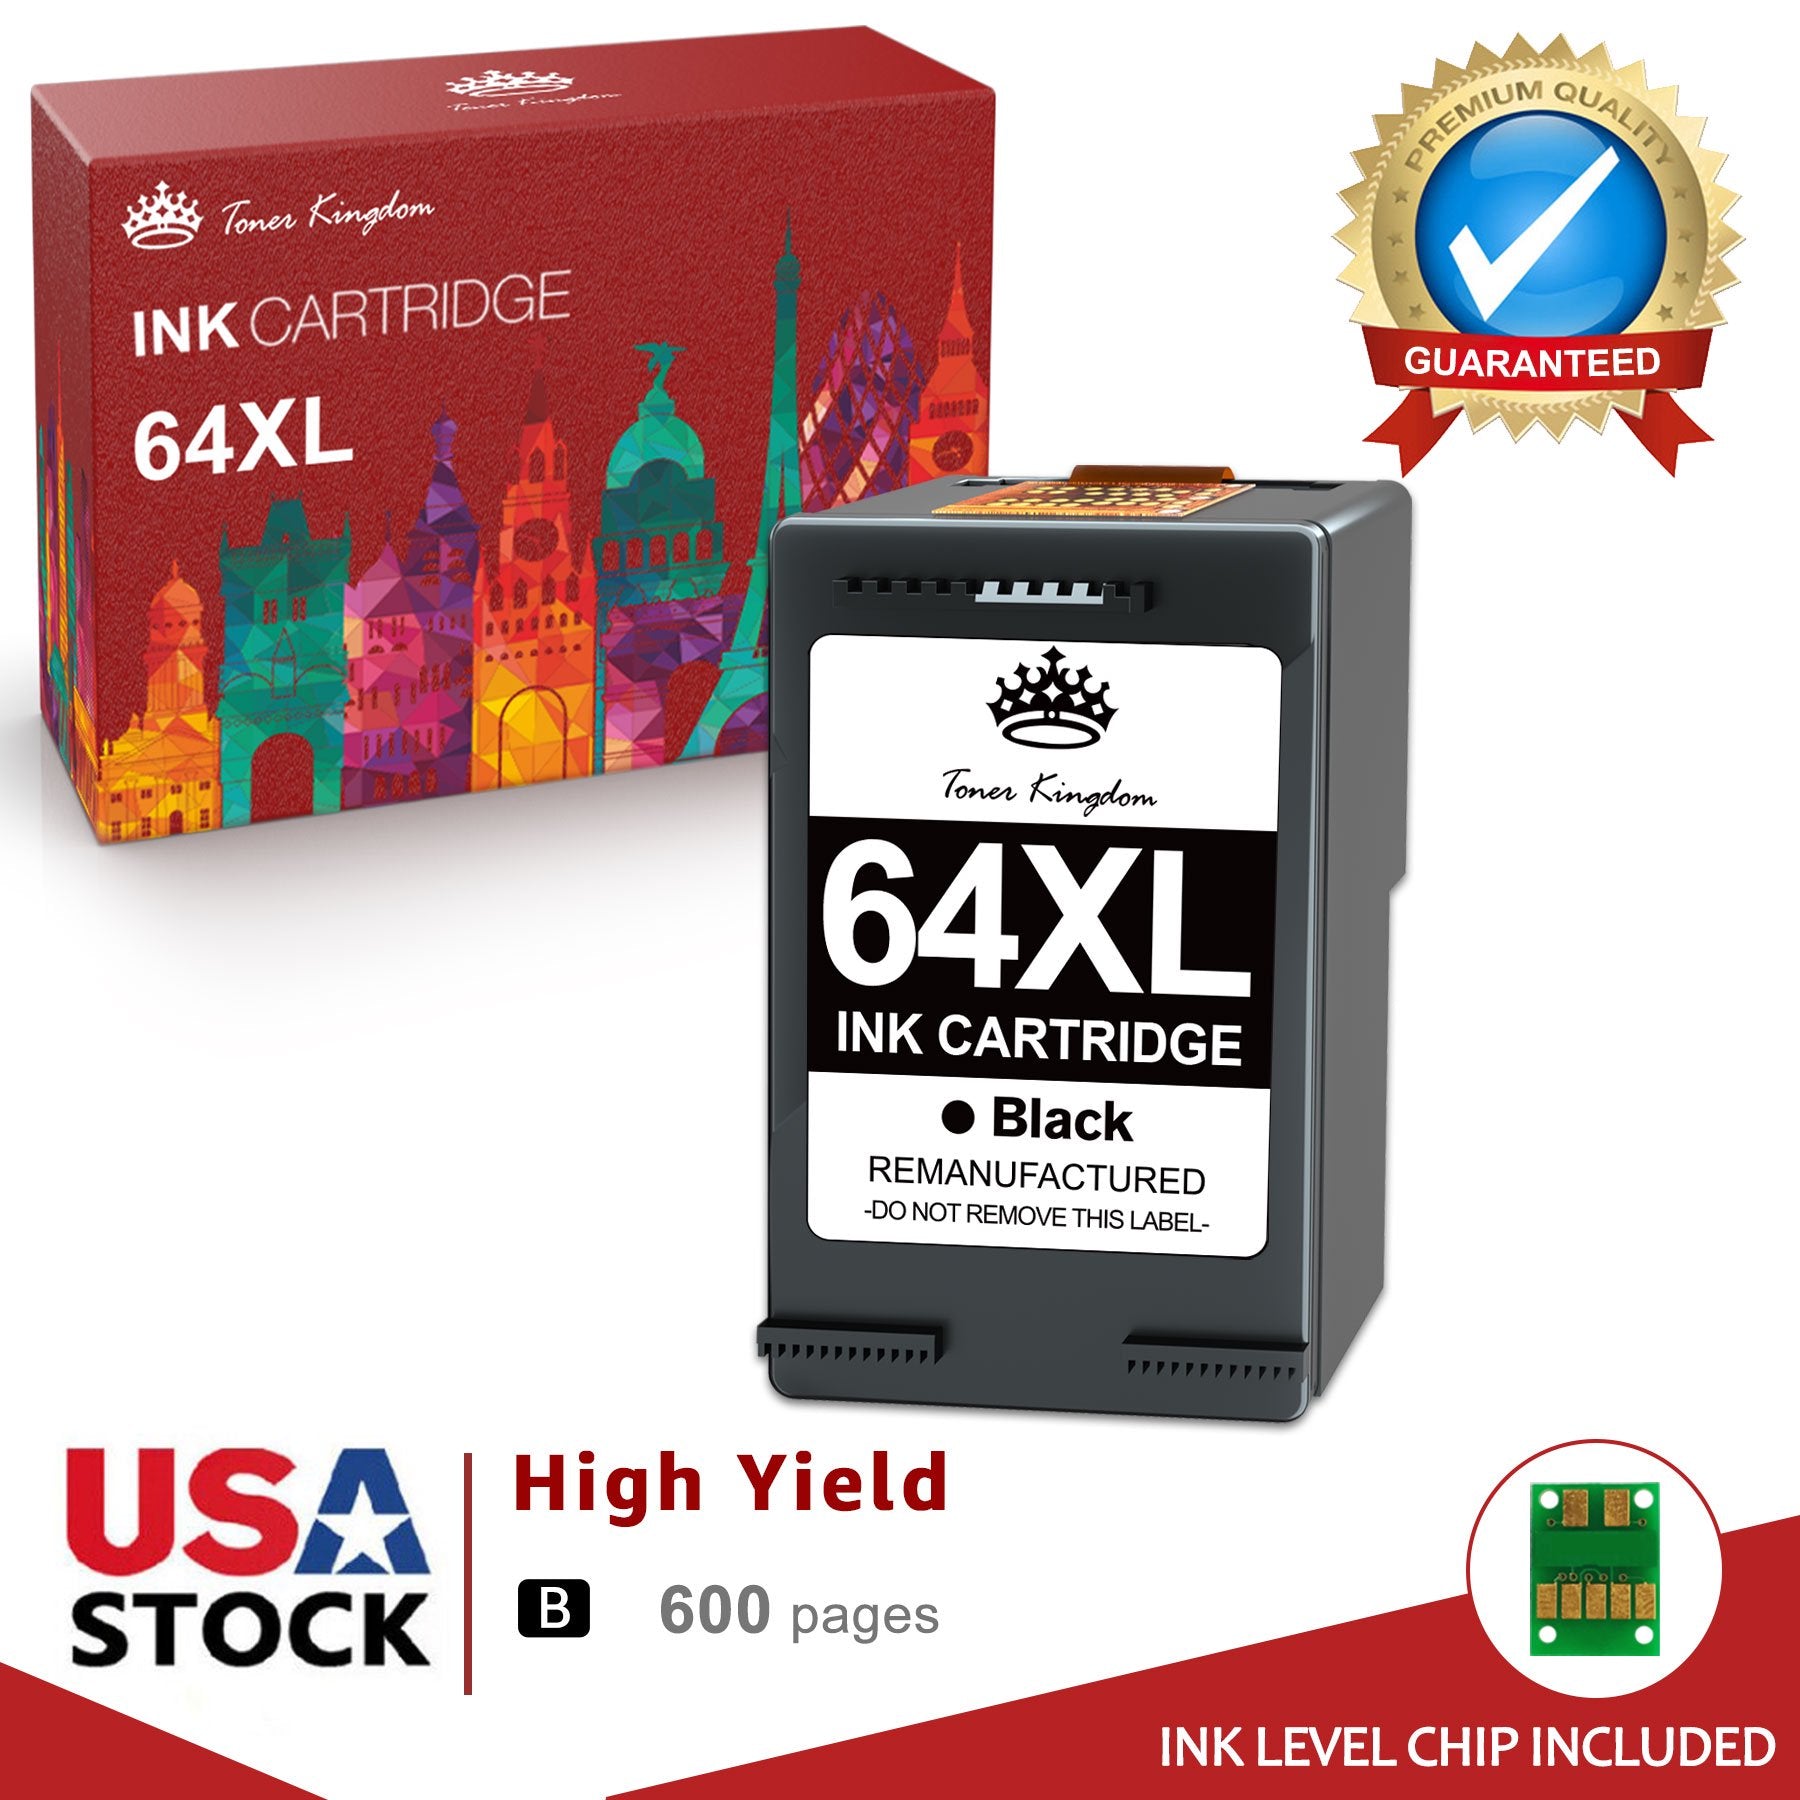 High Yield 64XL Black Ink Cartridge Replacement for HP Printer-1 pack